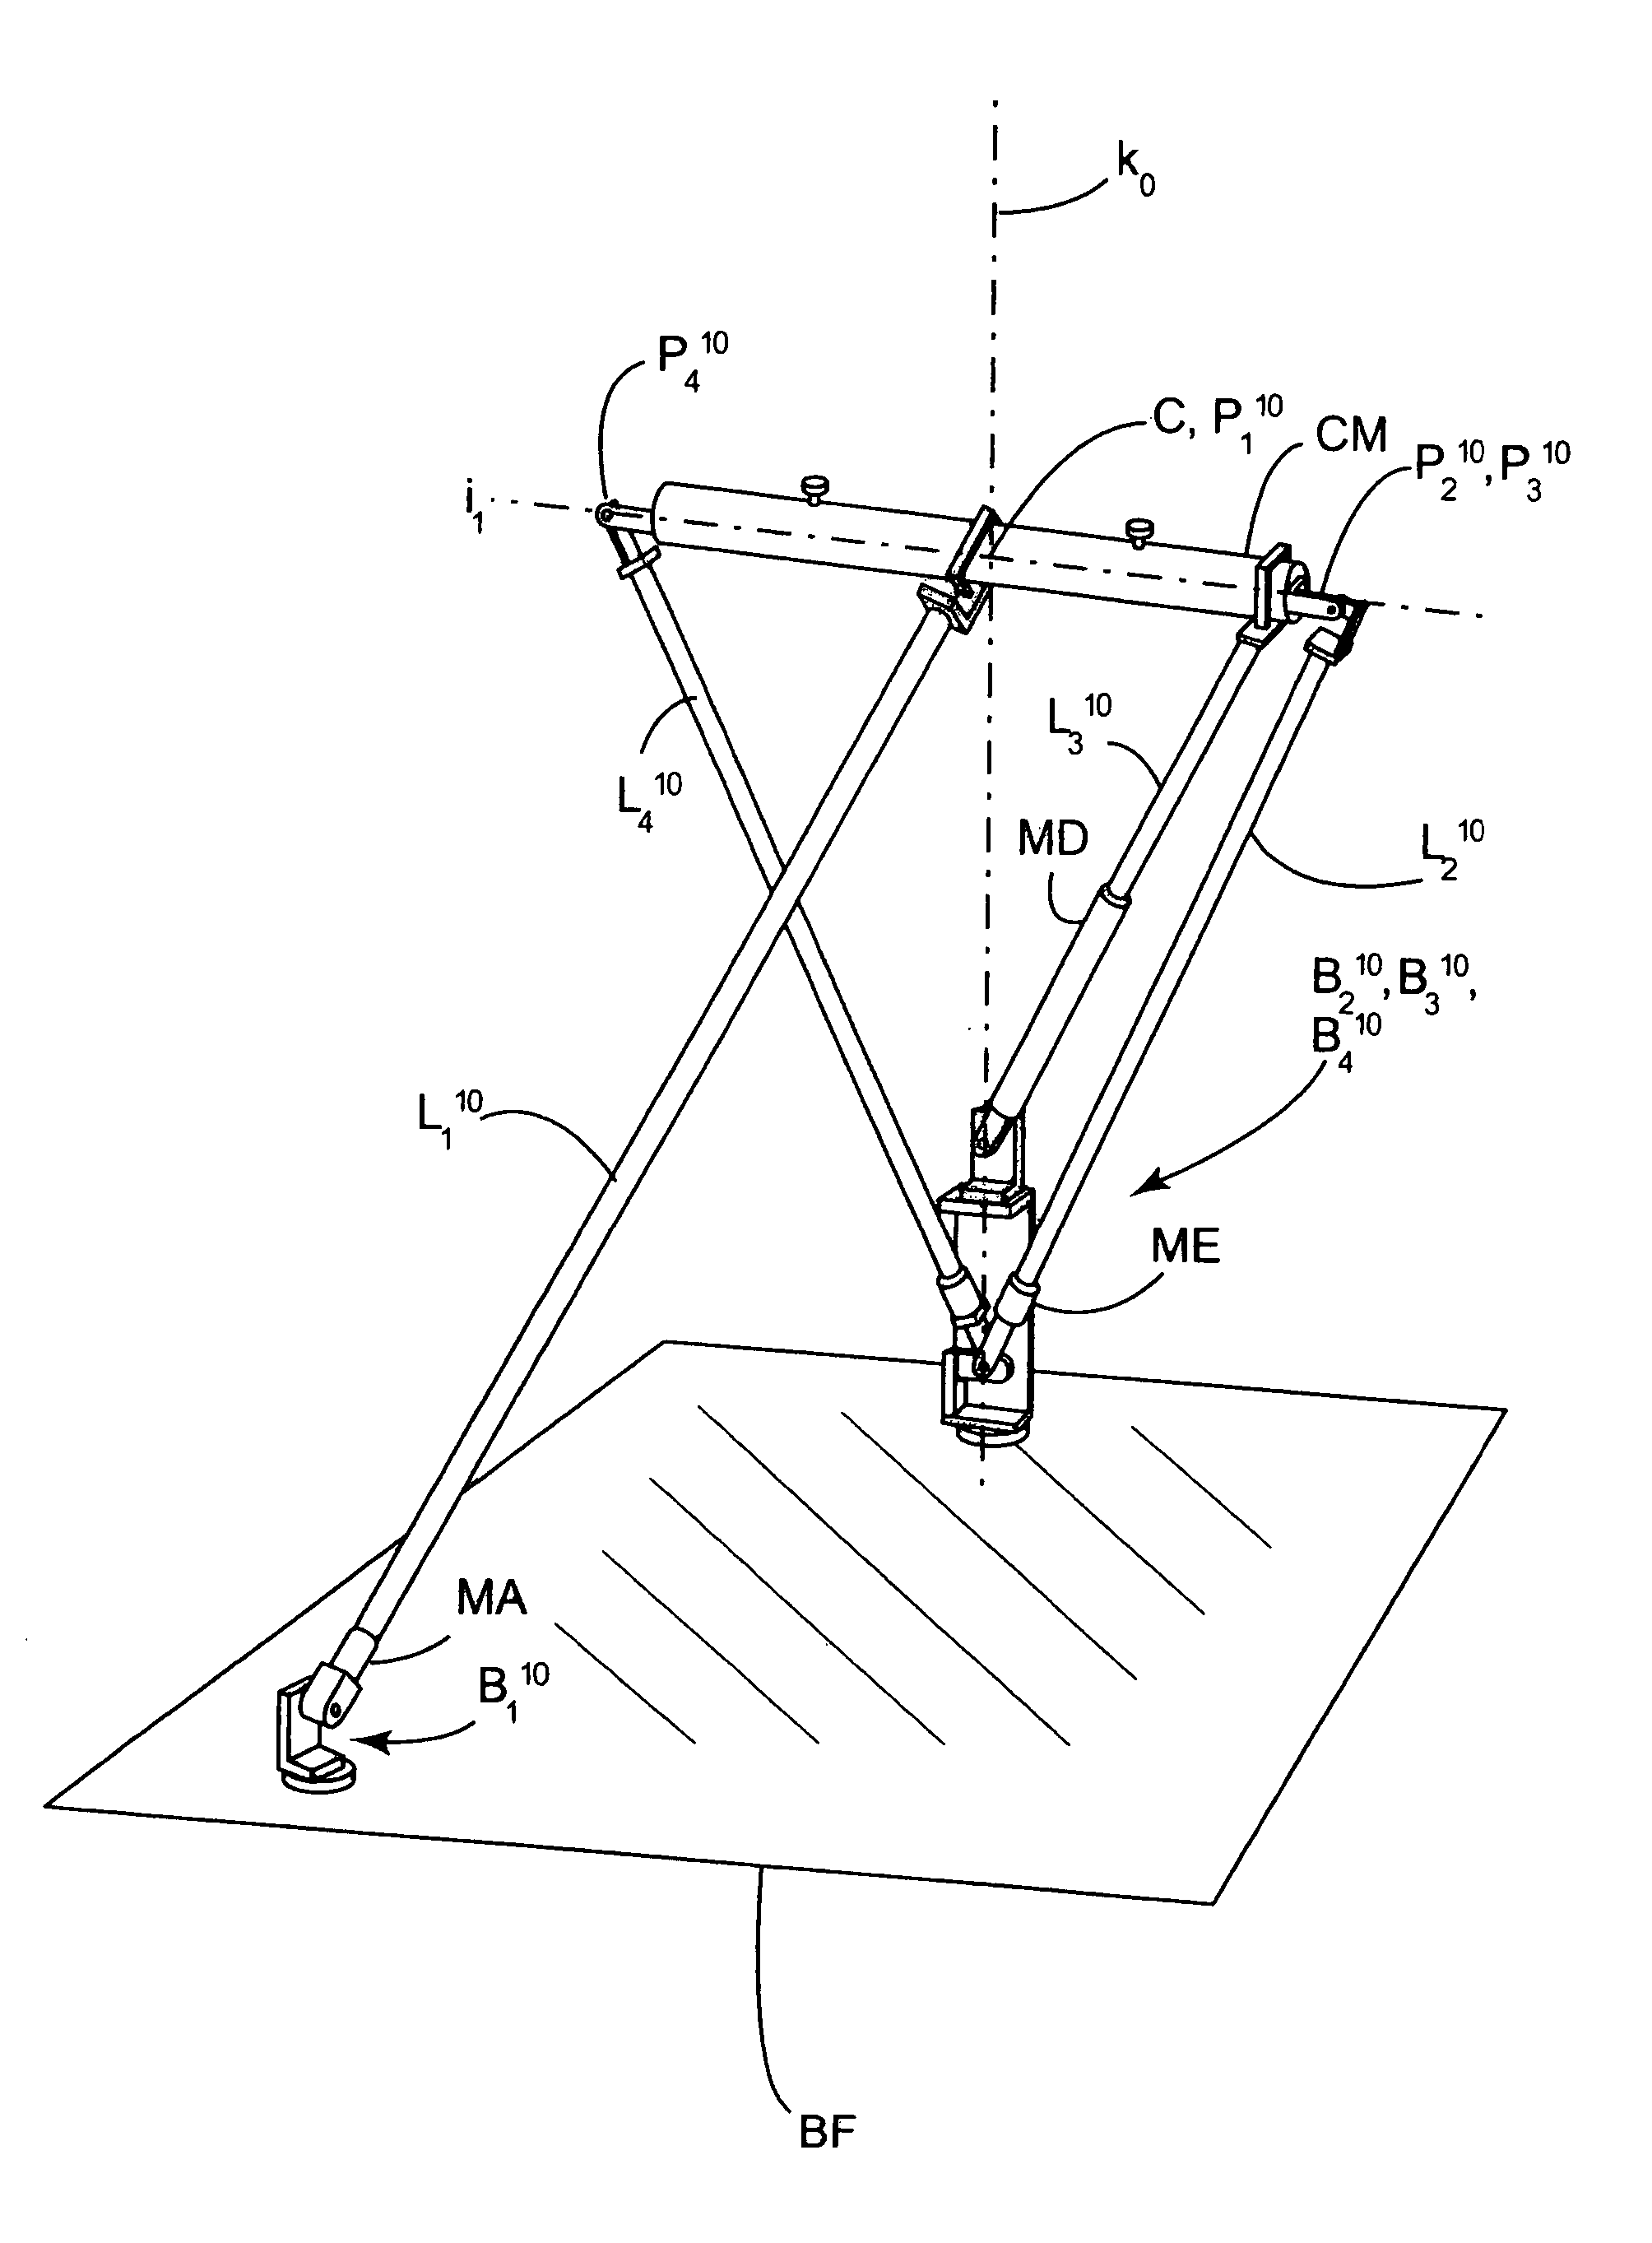 Parallel spherical mechanism with two degrees of freedom